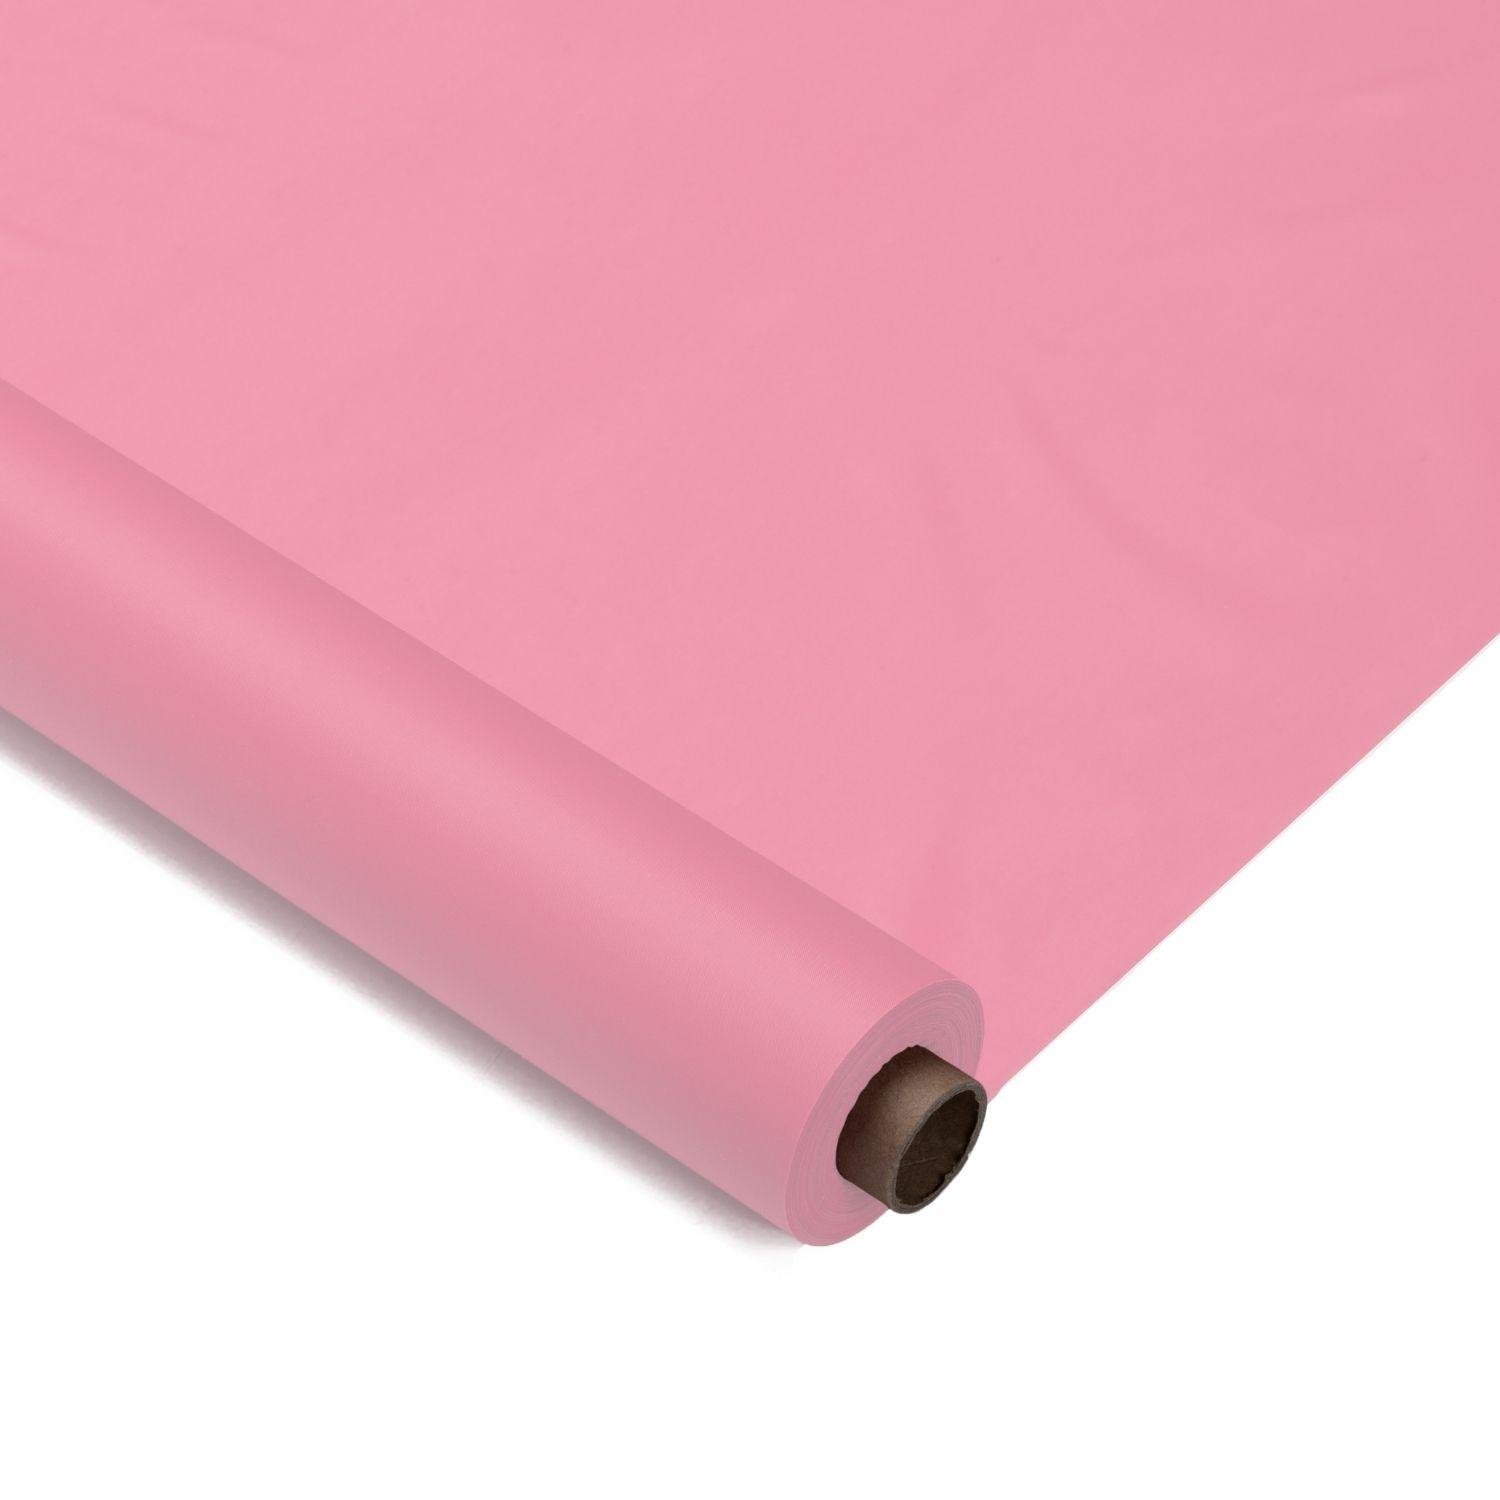 40 In. x 100 Ft. Pink Table Roll